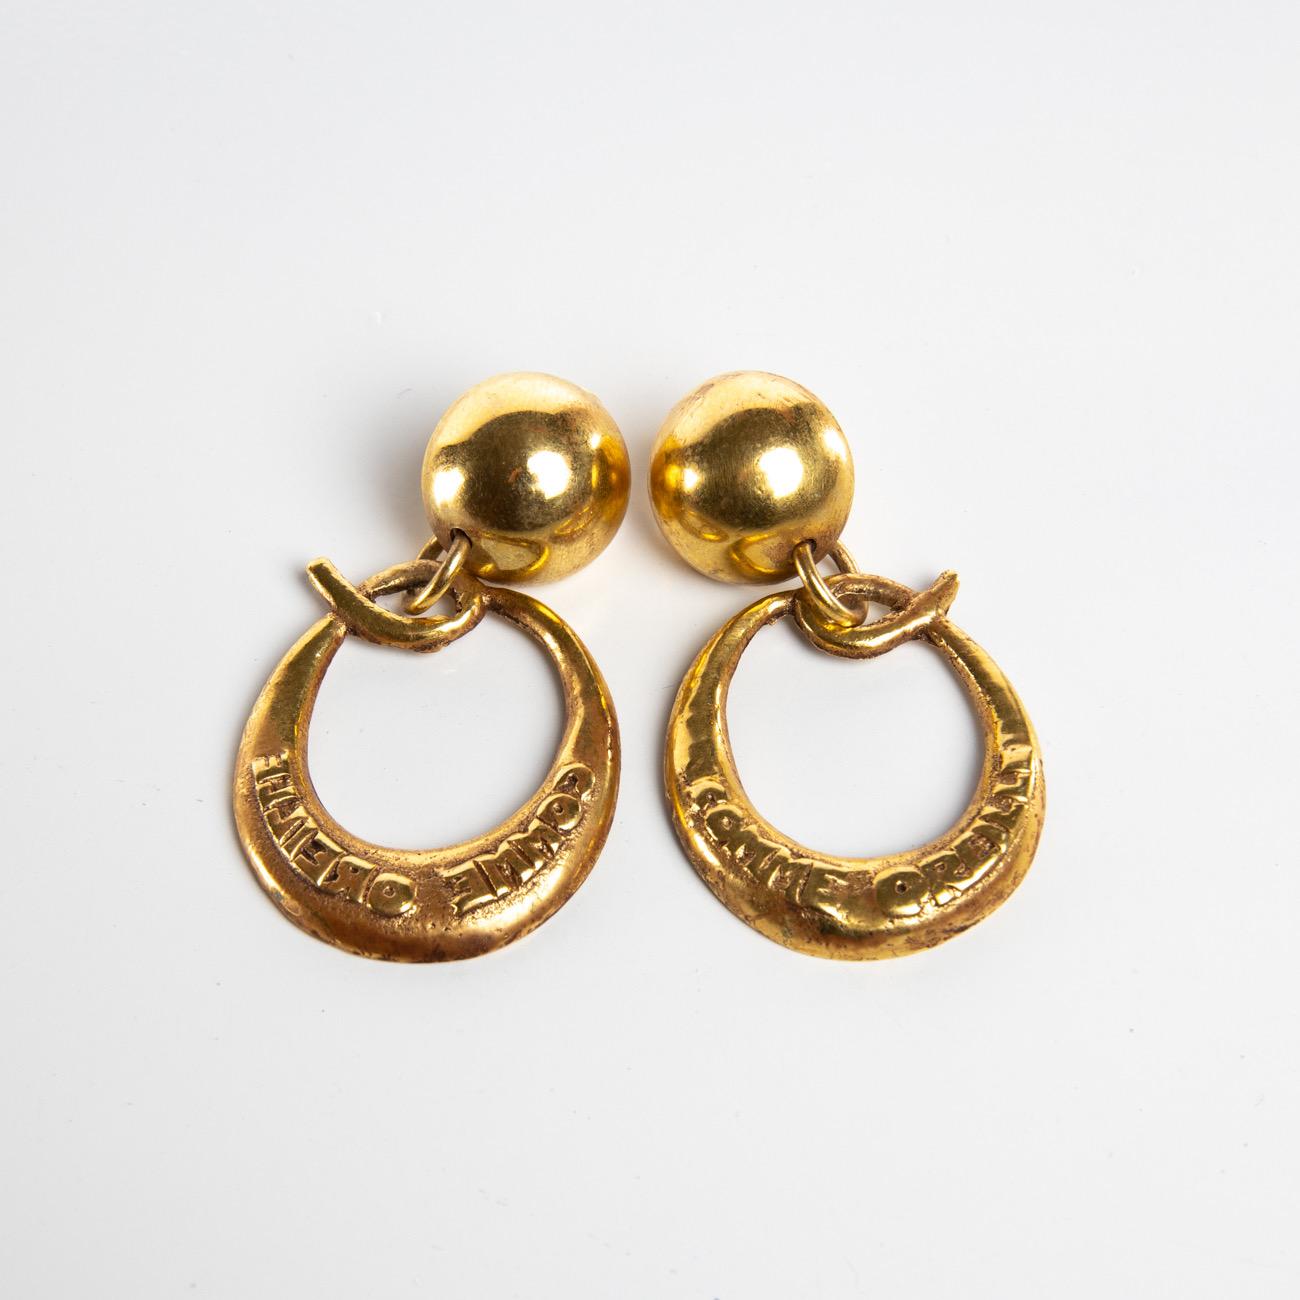 This pair of clip-on earrings is made of gilded bronze balls on which are suspended a large letter 